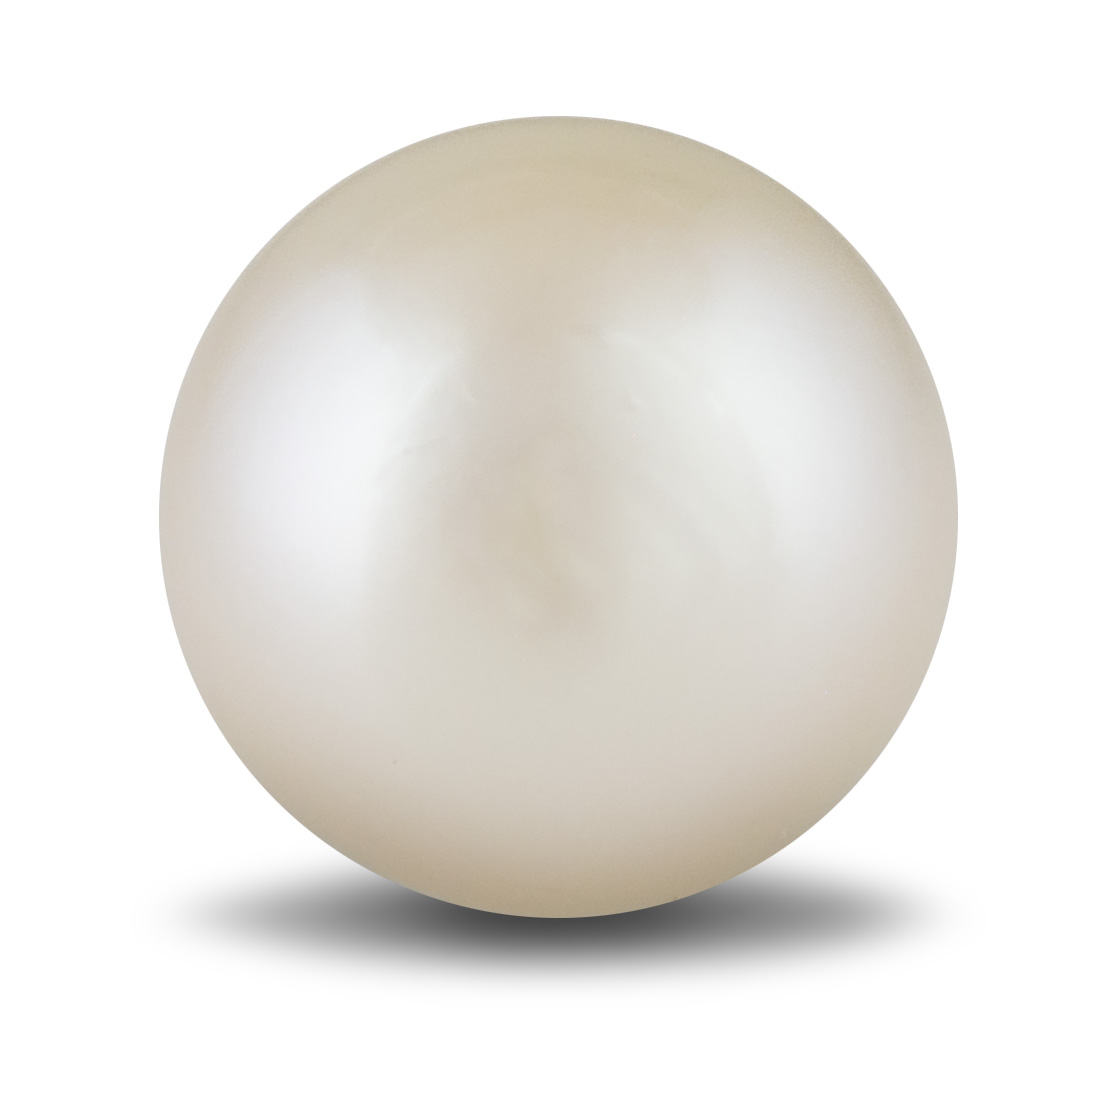 Gem in the Spotlight: Pearl : Adored Across the Ages for Purity